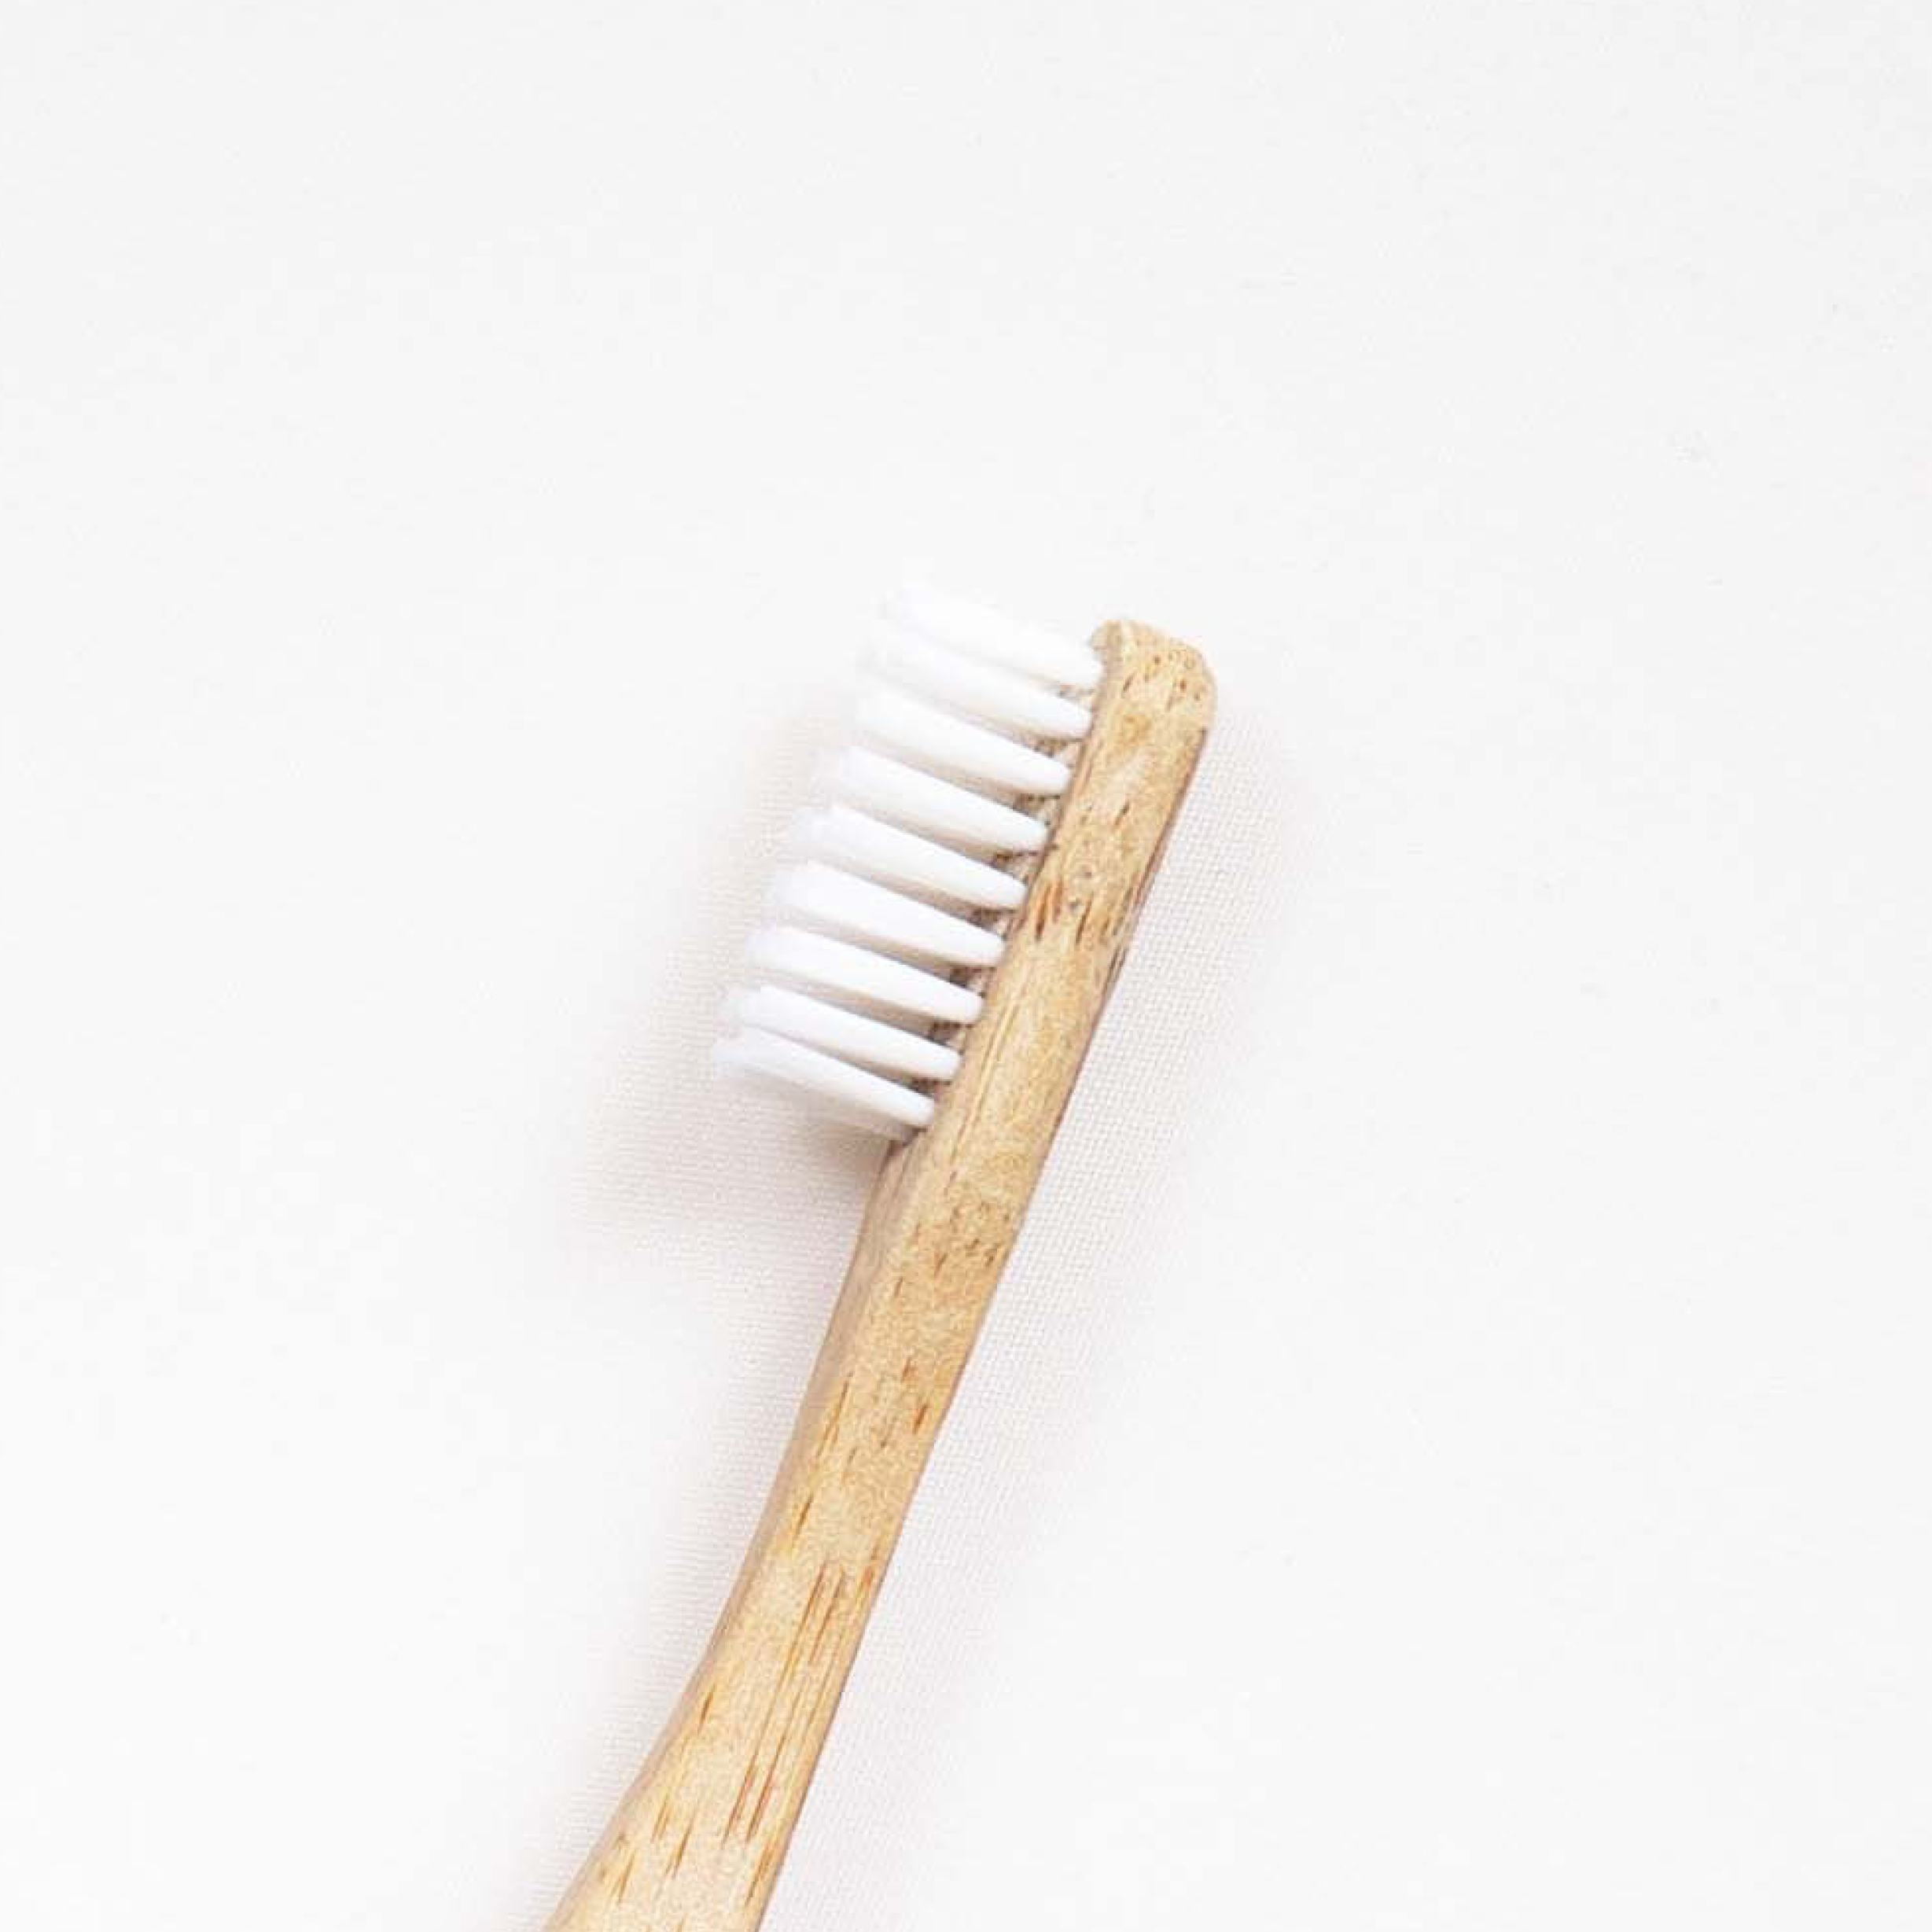 A wooden toothbrush represents our video production work for Umbrella Dental Partners.